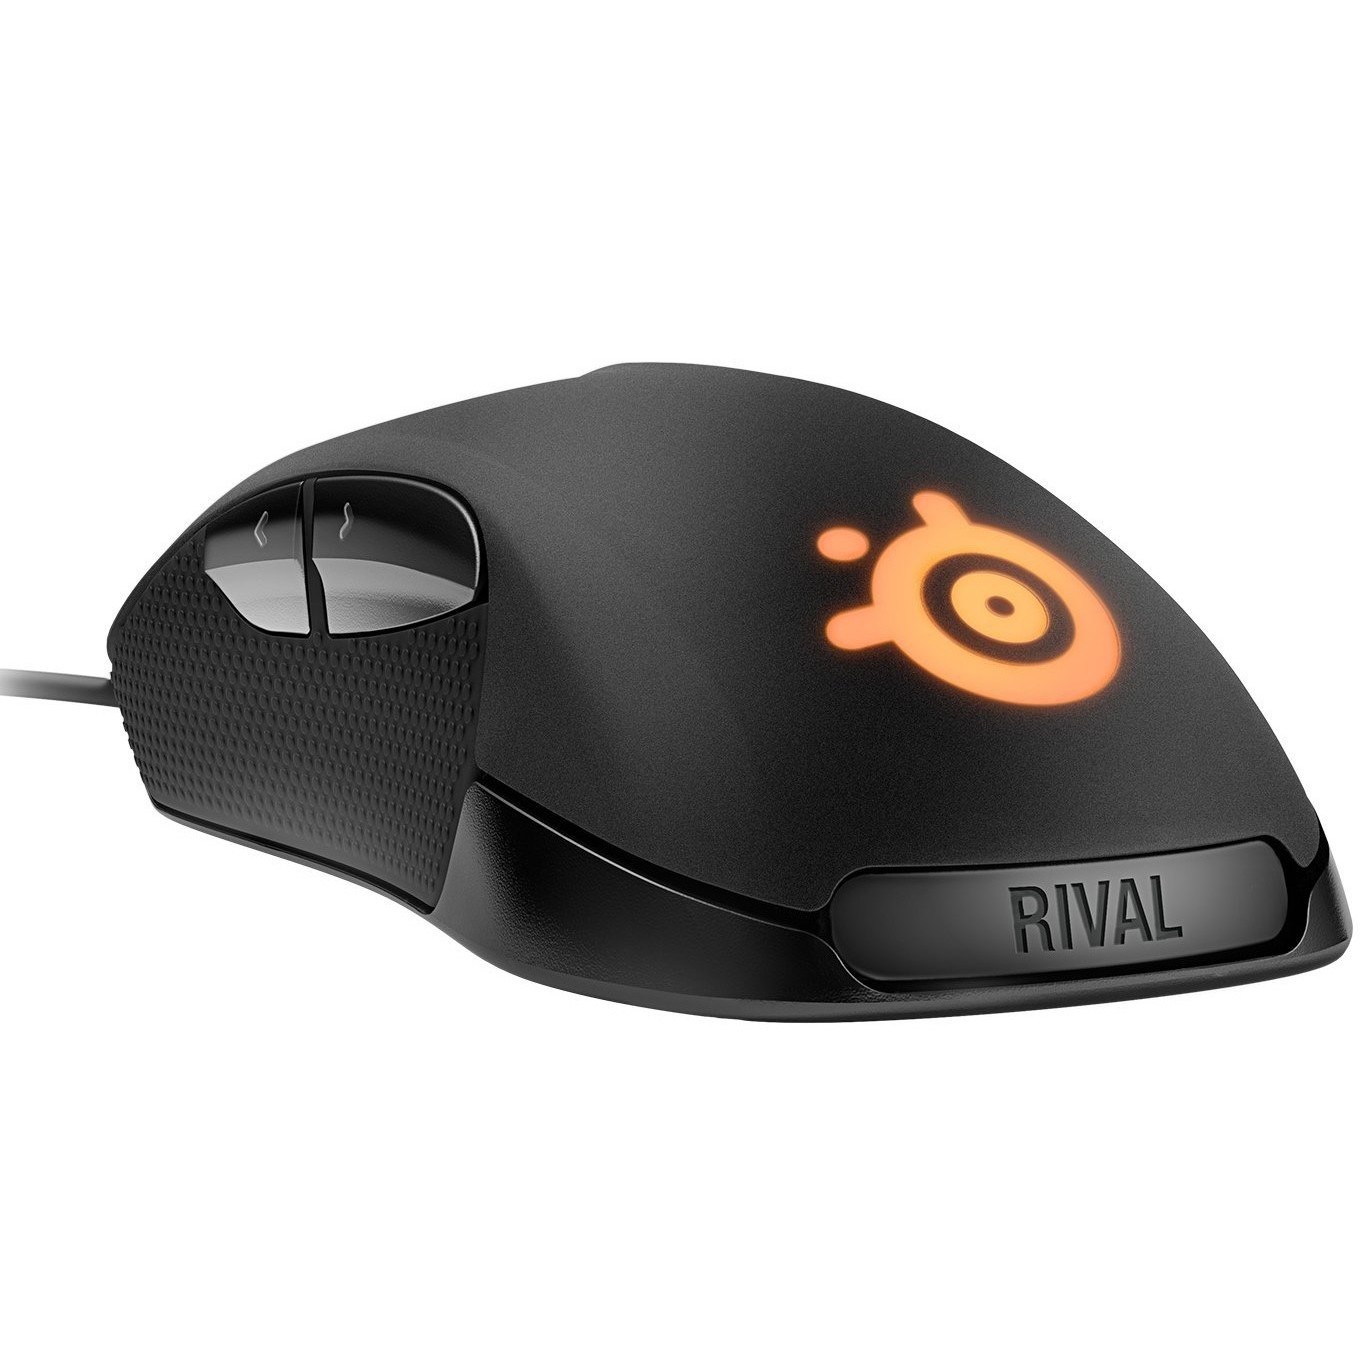 Steelseries rival dota edition фото 92